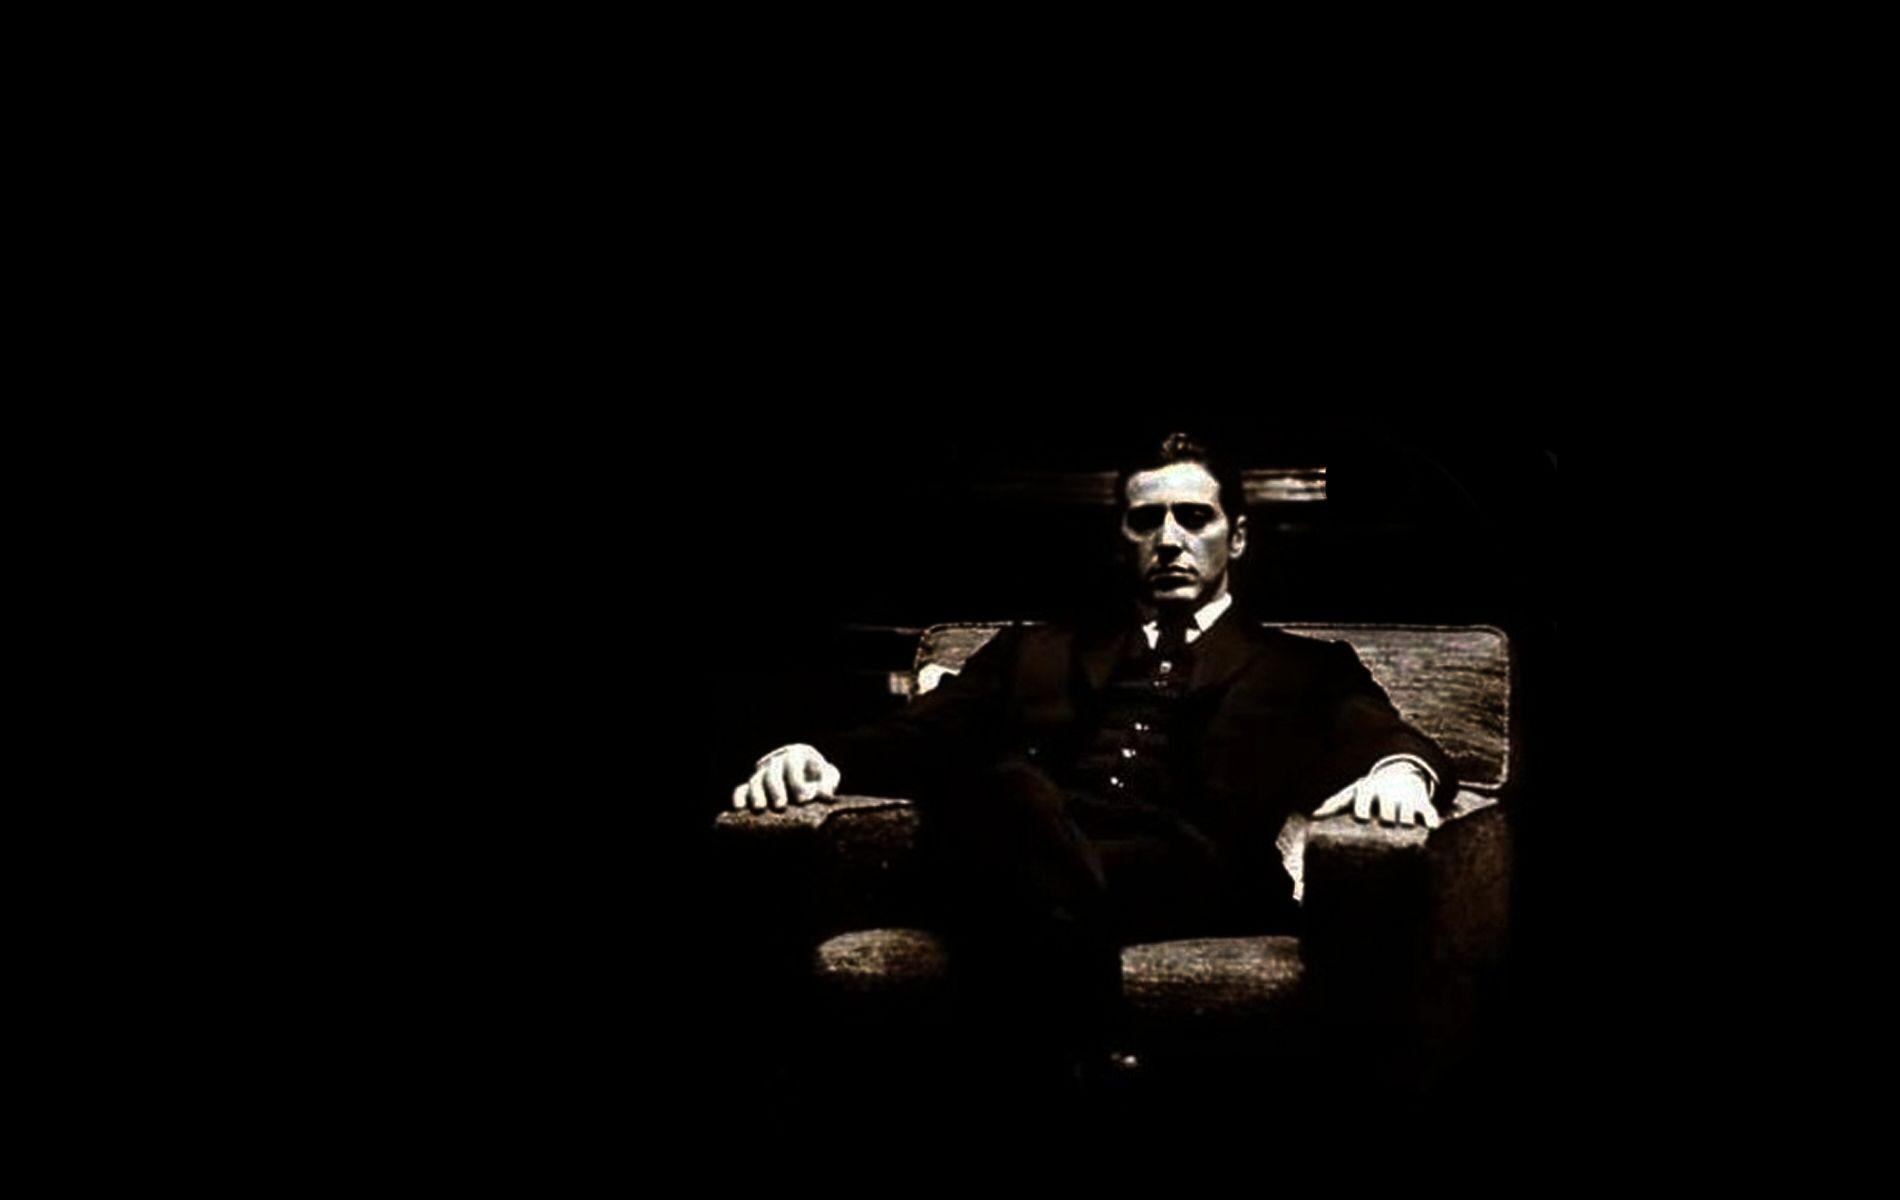 The Godfather Wallpaper. The Godfather Background